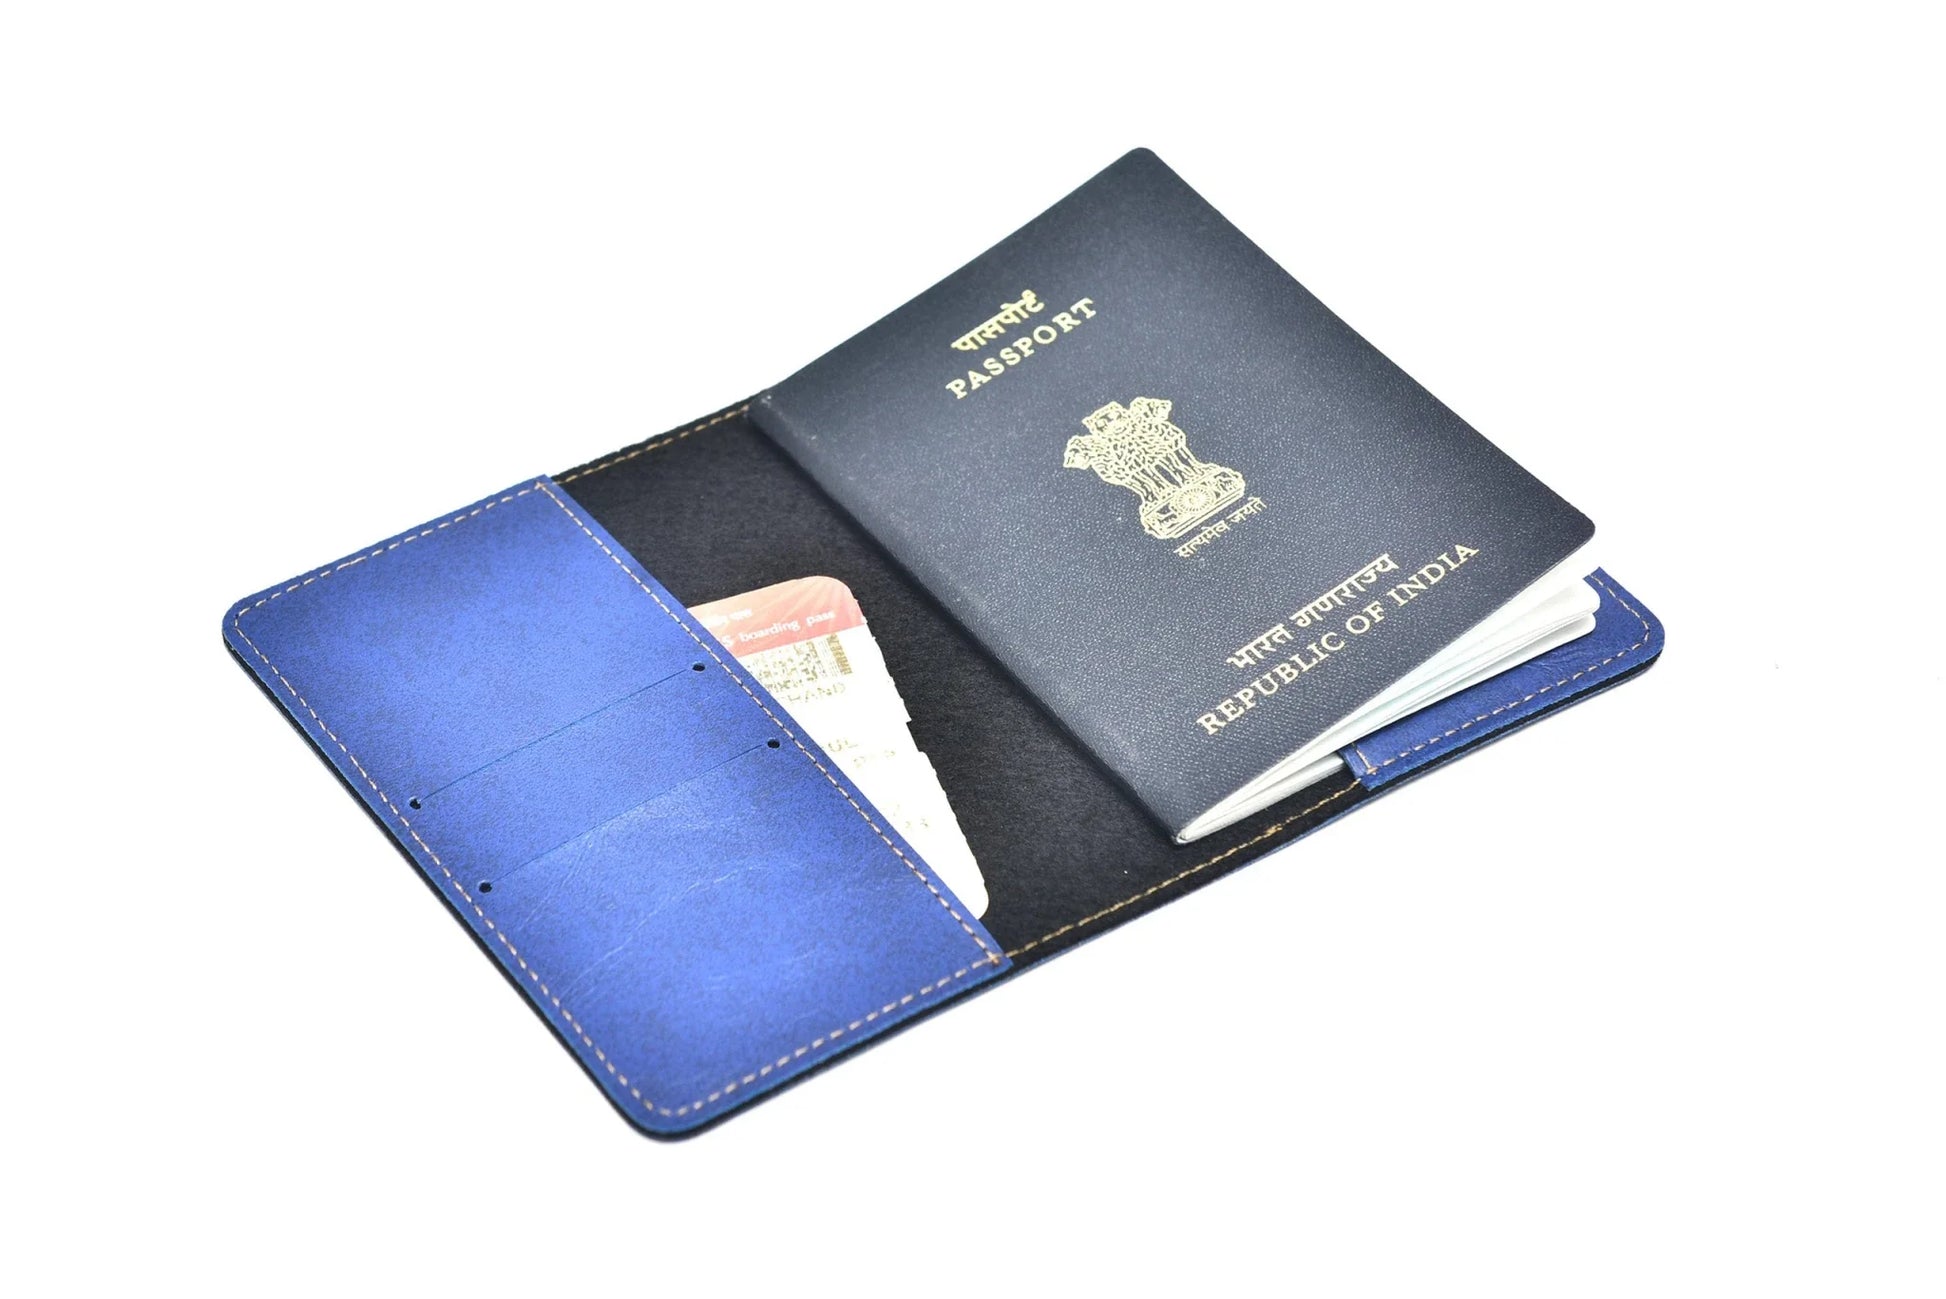 Inside or open view of royal blue passport case